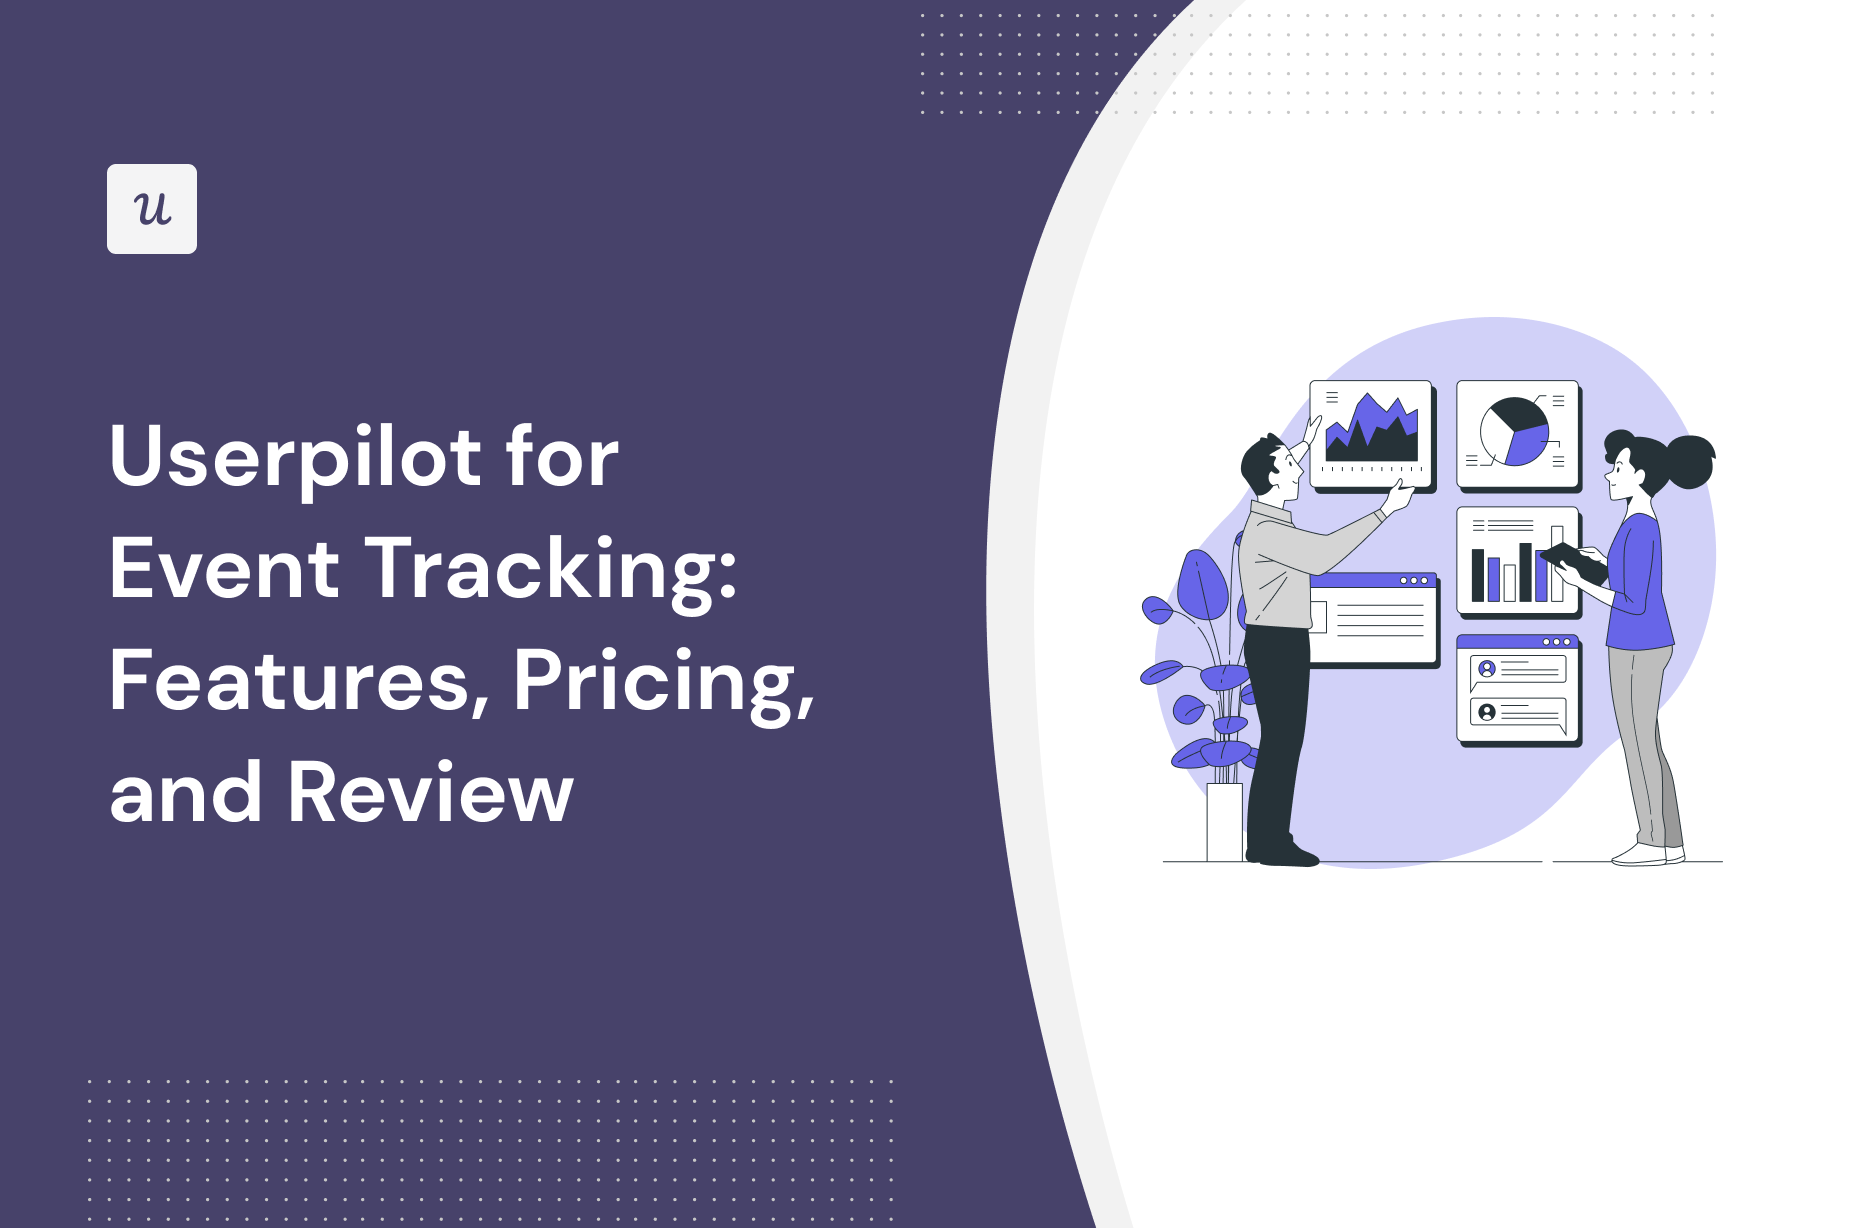 Userpilot for Event Tracking: Features, Pricing, and Review